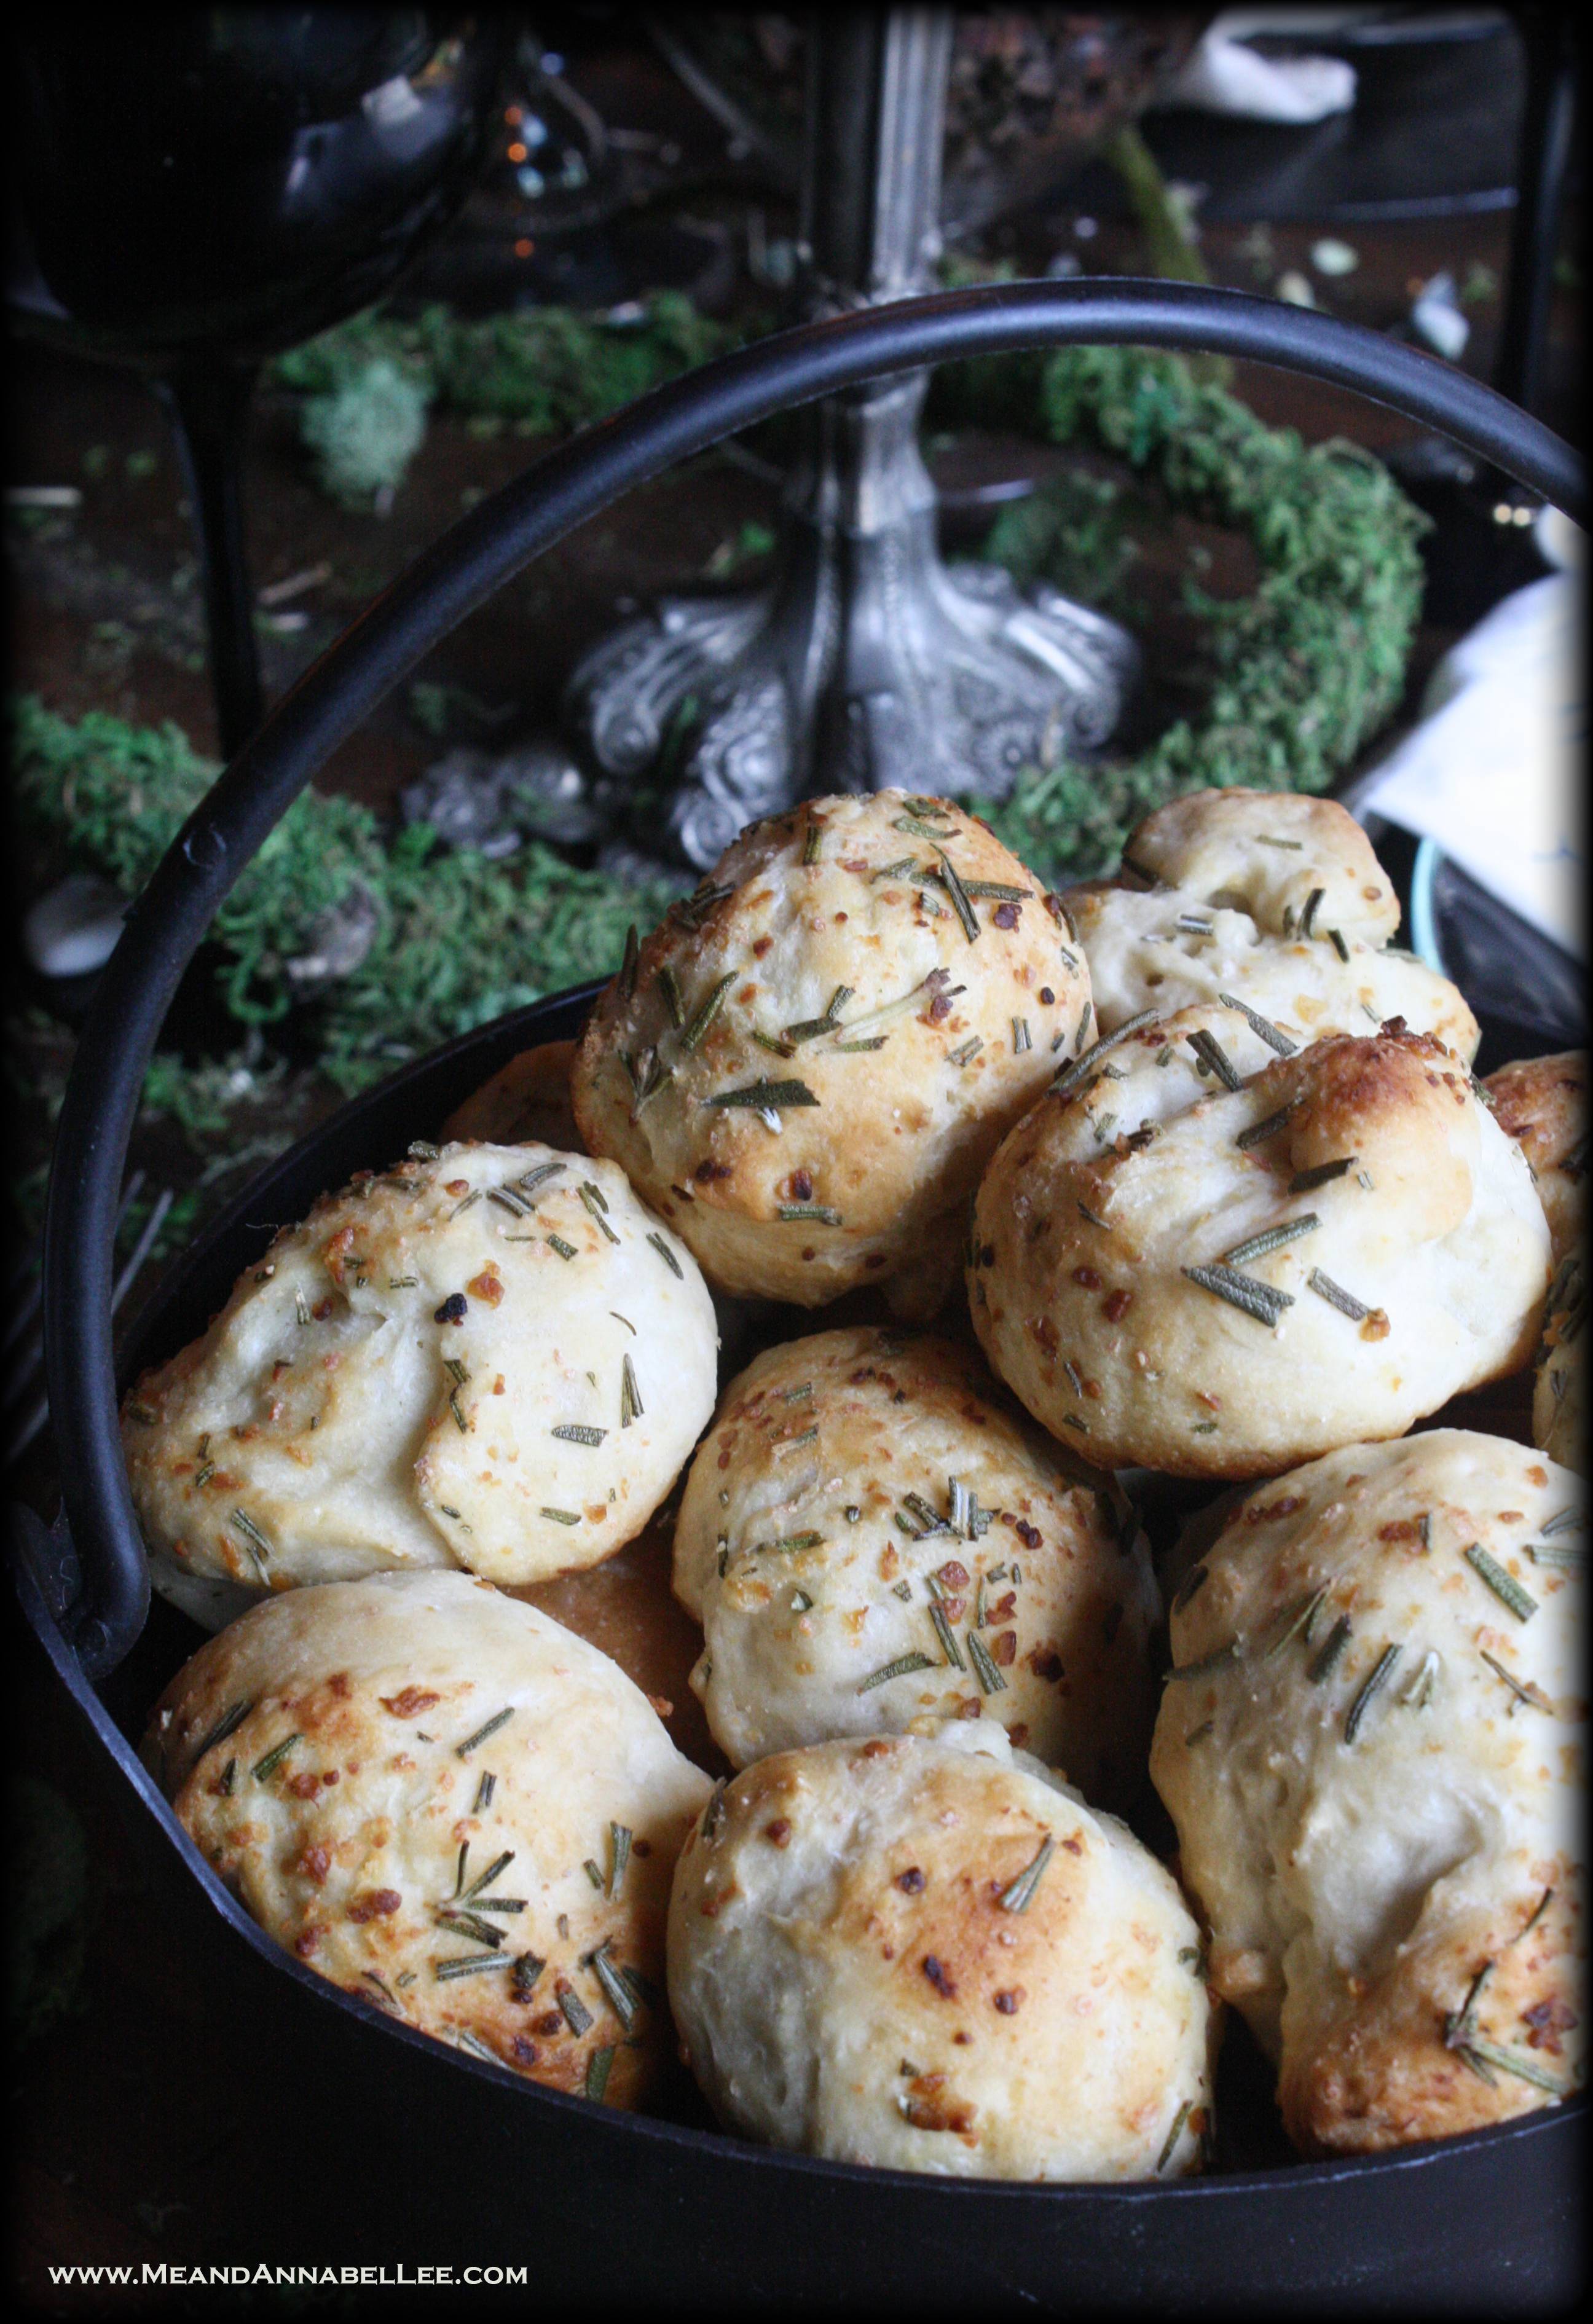 Witches Dinner Party | Rosemary Garlic Bread Rolls Recipe | Fall Flavors | Samhain Feast | Halloween Food | Dinner Menu | www.MeandAnnabelLee.com